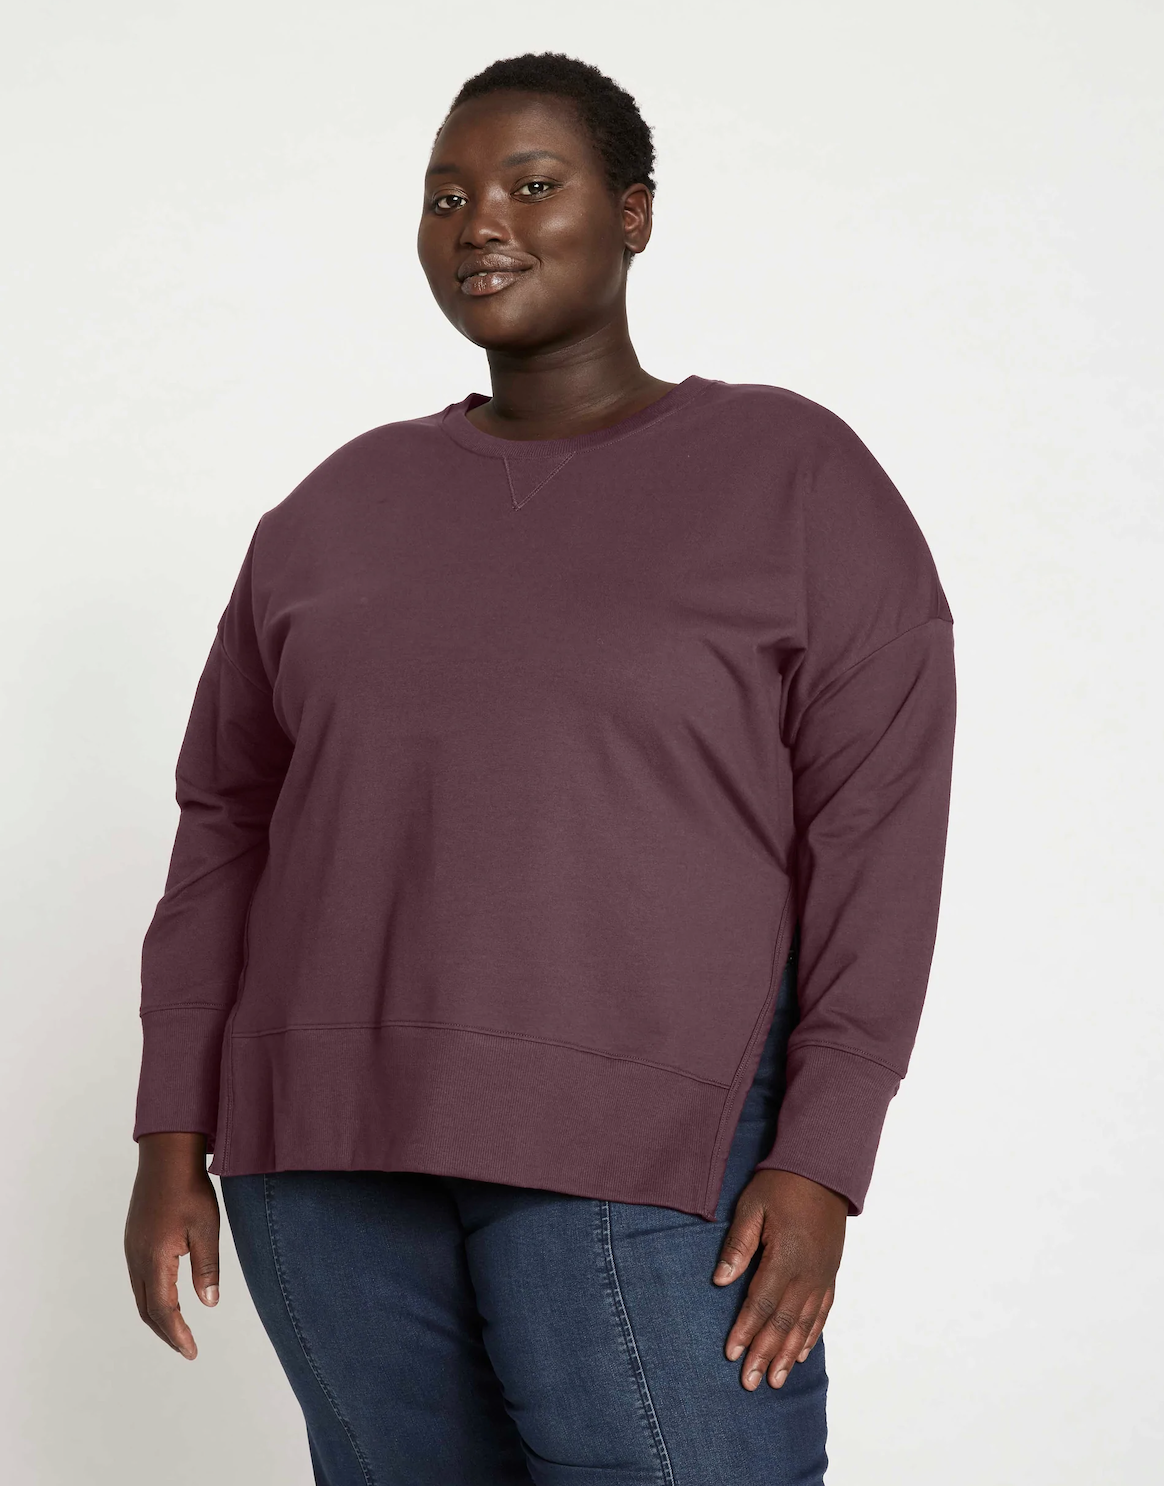 a model wearing the sweater with a pair of jeans in front of a plain bacgkround